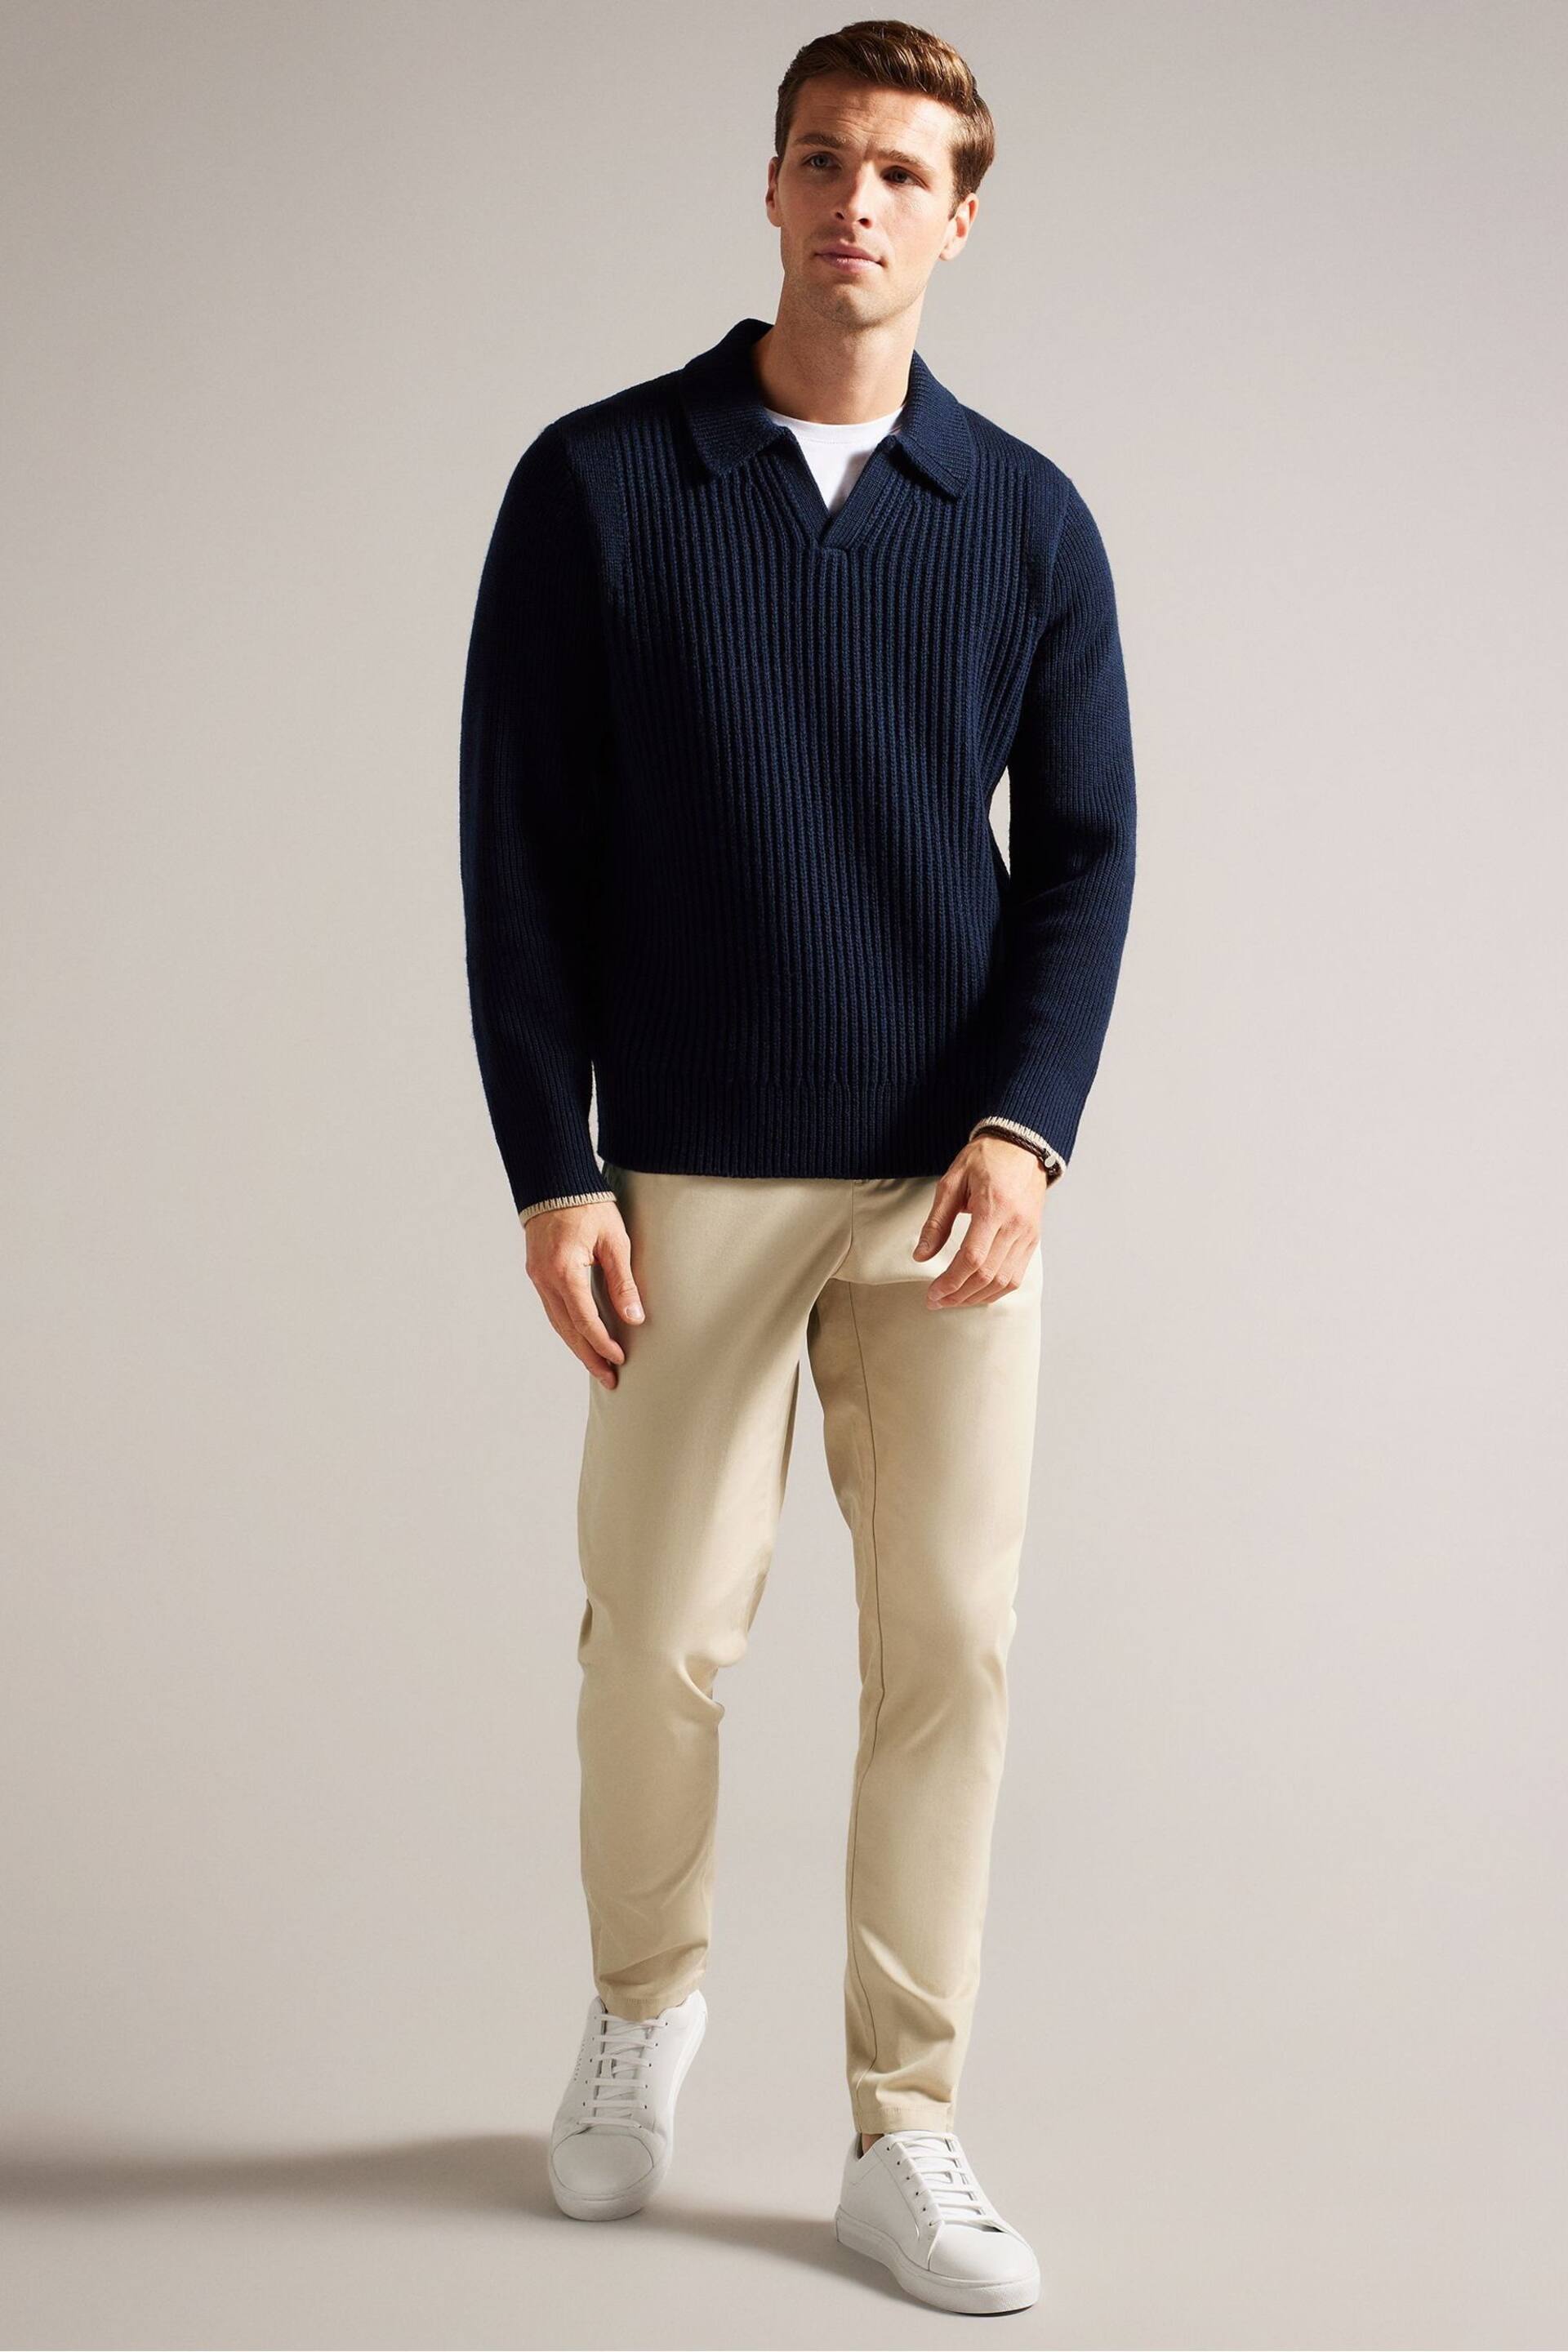 Ted Baker Cream Regular Fit Haybrn Textured Chino Trousers - Image 1 of 5